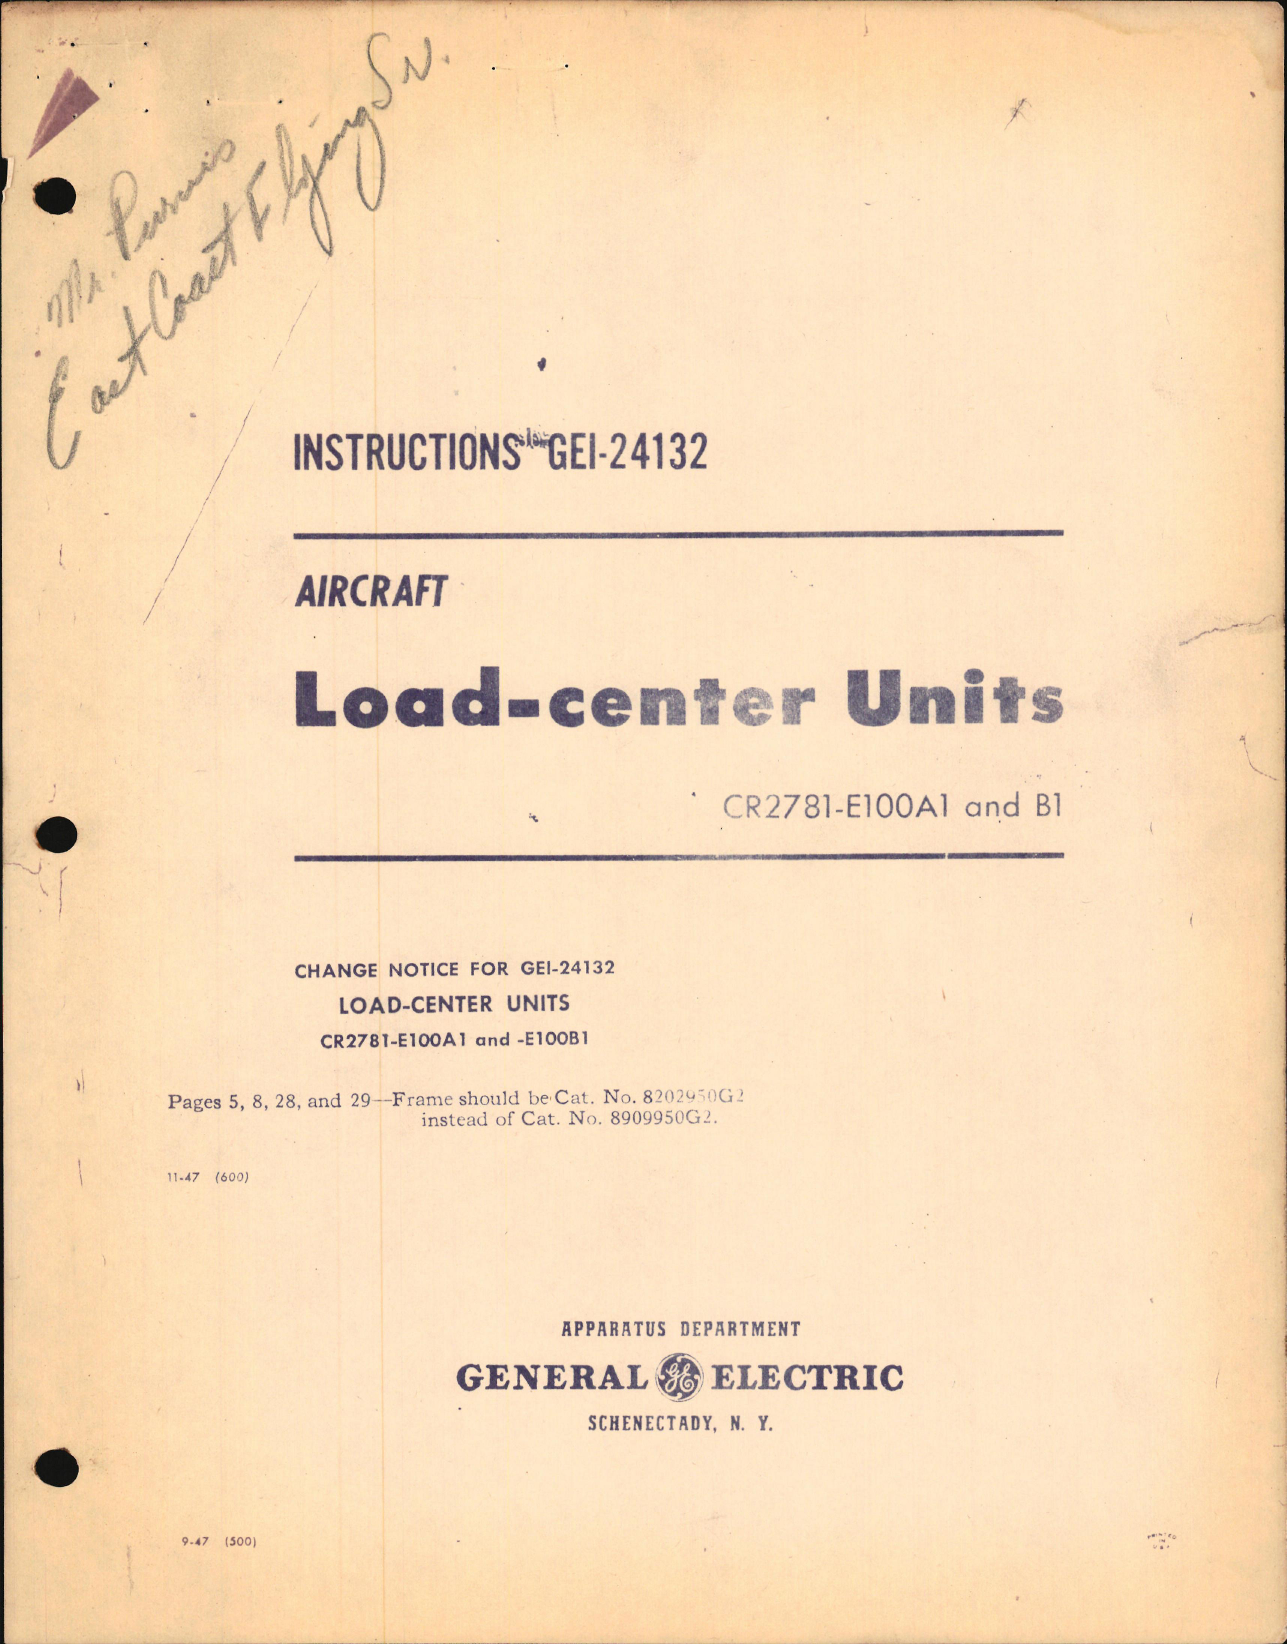 Sample page 1 from AirCorps Library document: Instructions for GEI-24132 Load-Center Units CR2781-E100A1 and B1